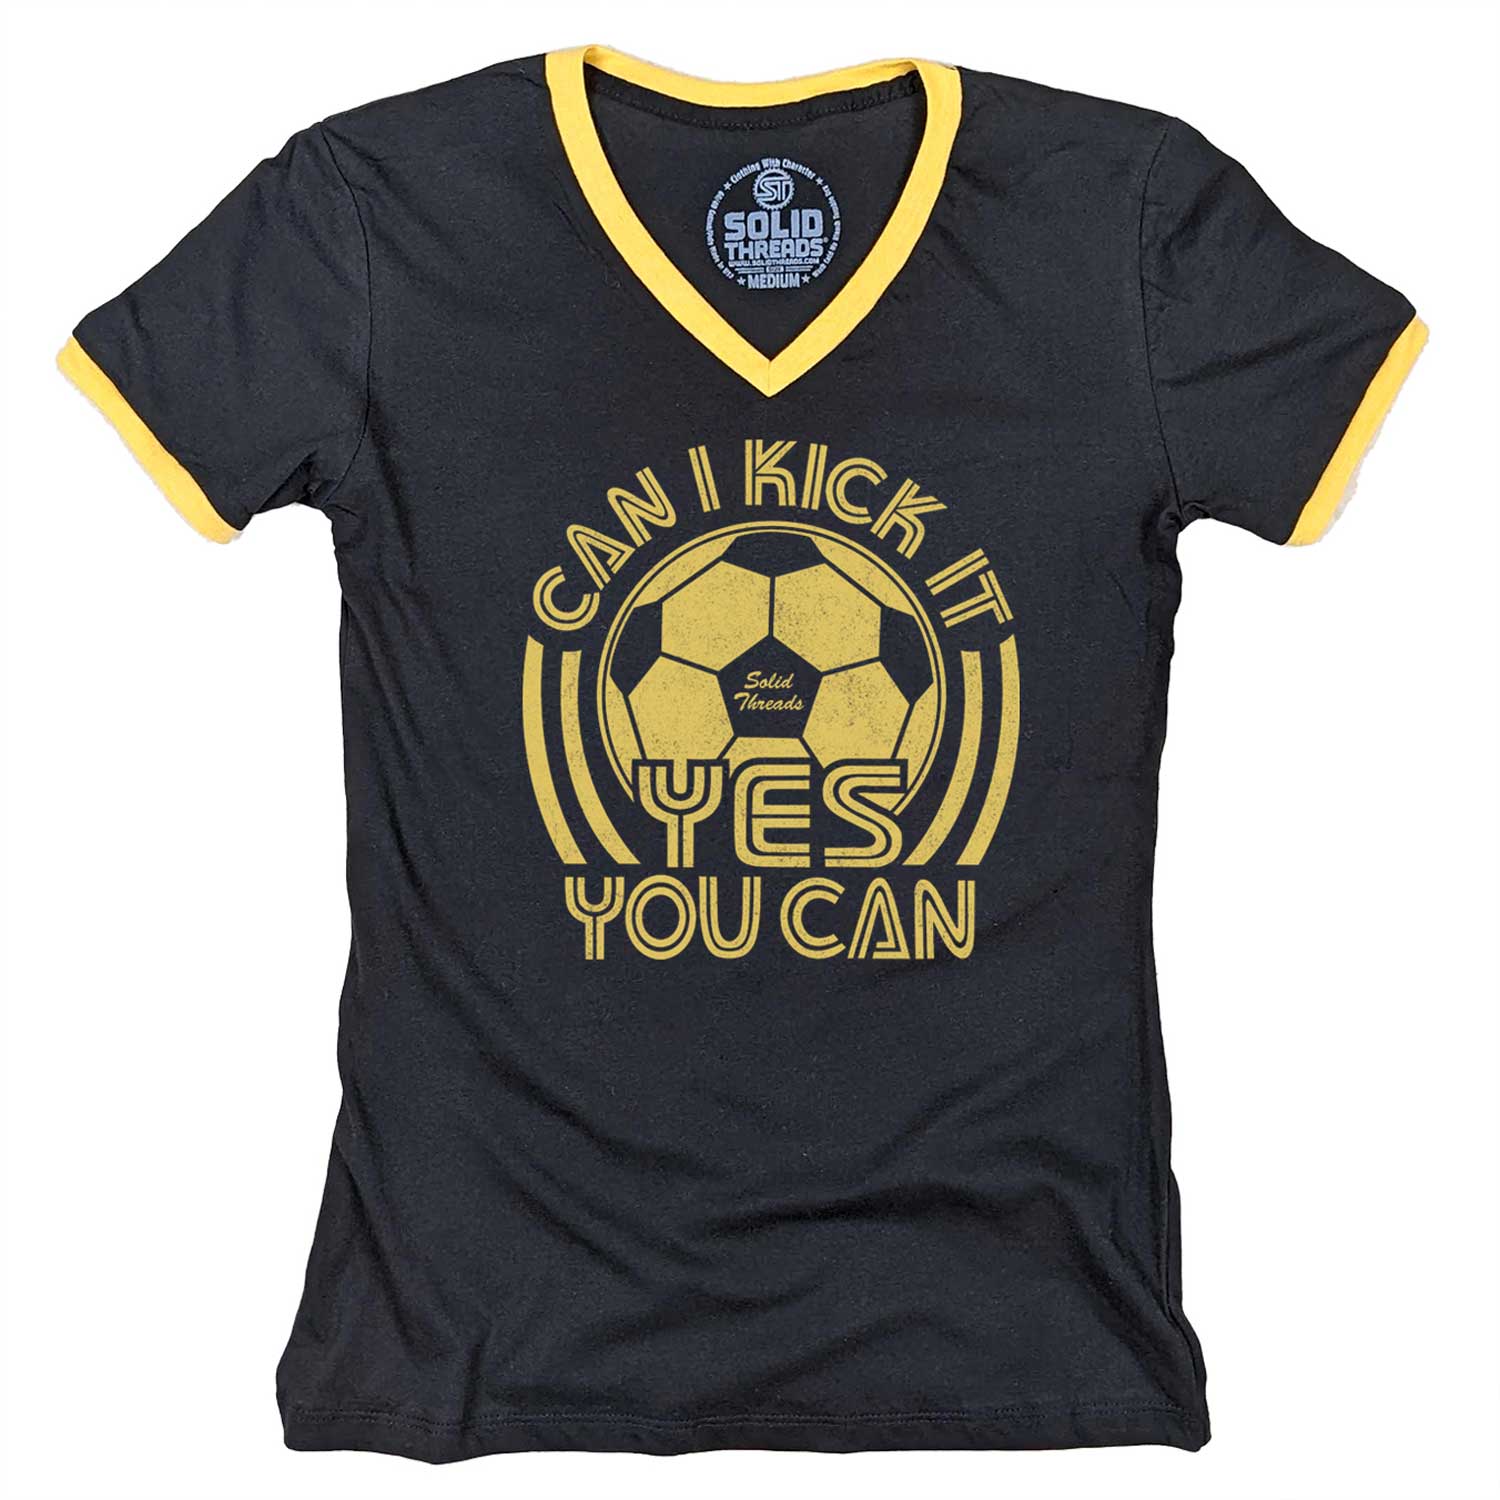 Women's Can I Kick It, Yes You Can Vintage Graphic V-Neck Tee | Funny Soccer T-shirt | Solid Threads